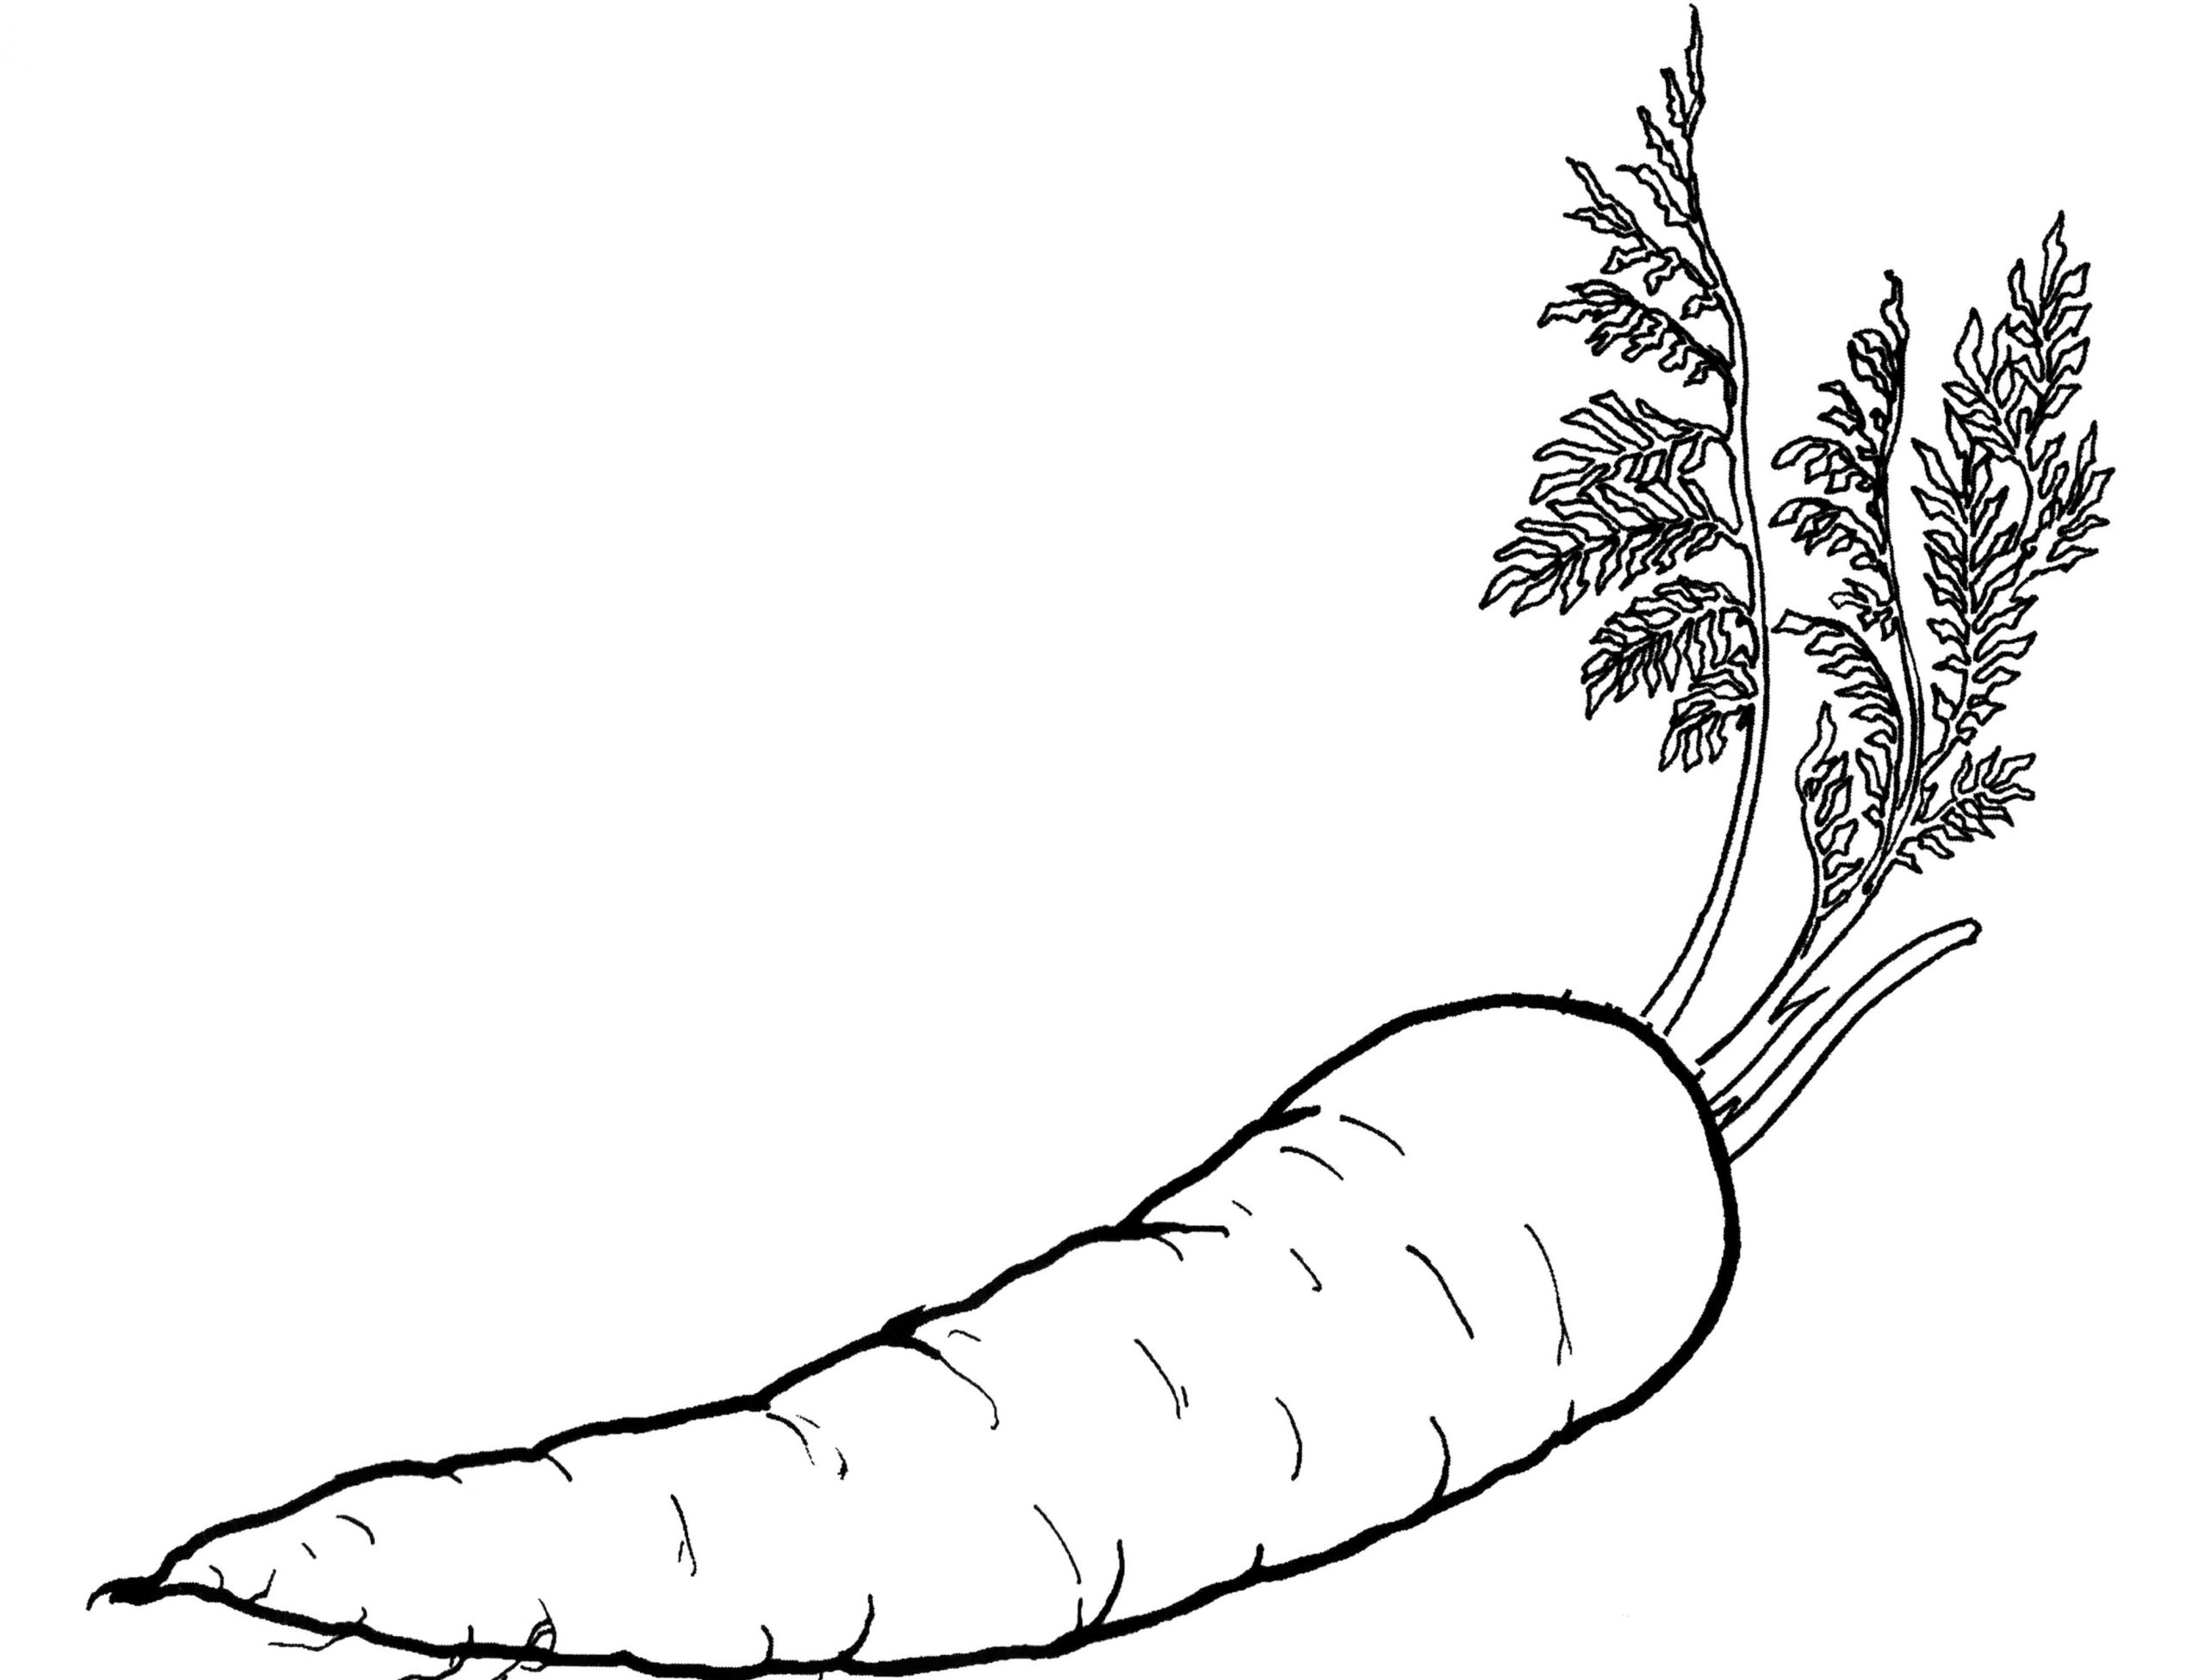 Vegetable Coloring Book Kids
 Ve able Coloring Pages Best Coloring Pages For Kids